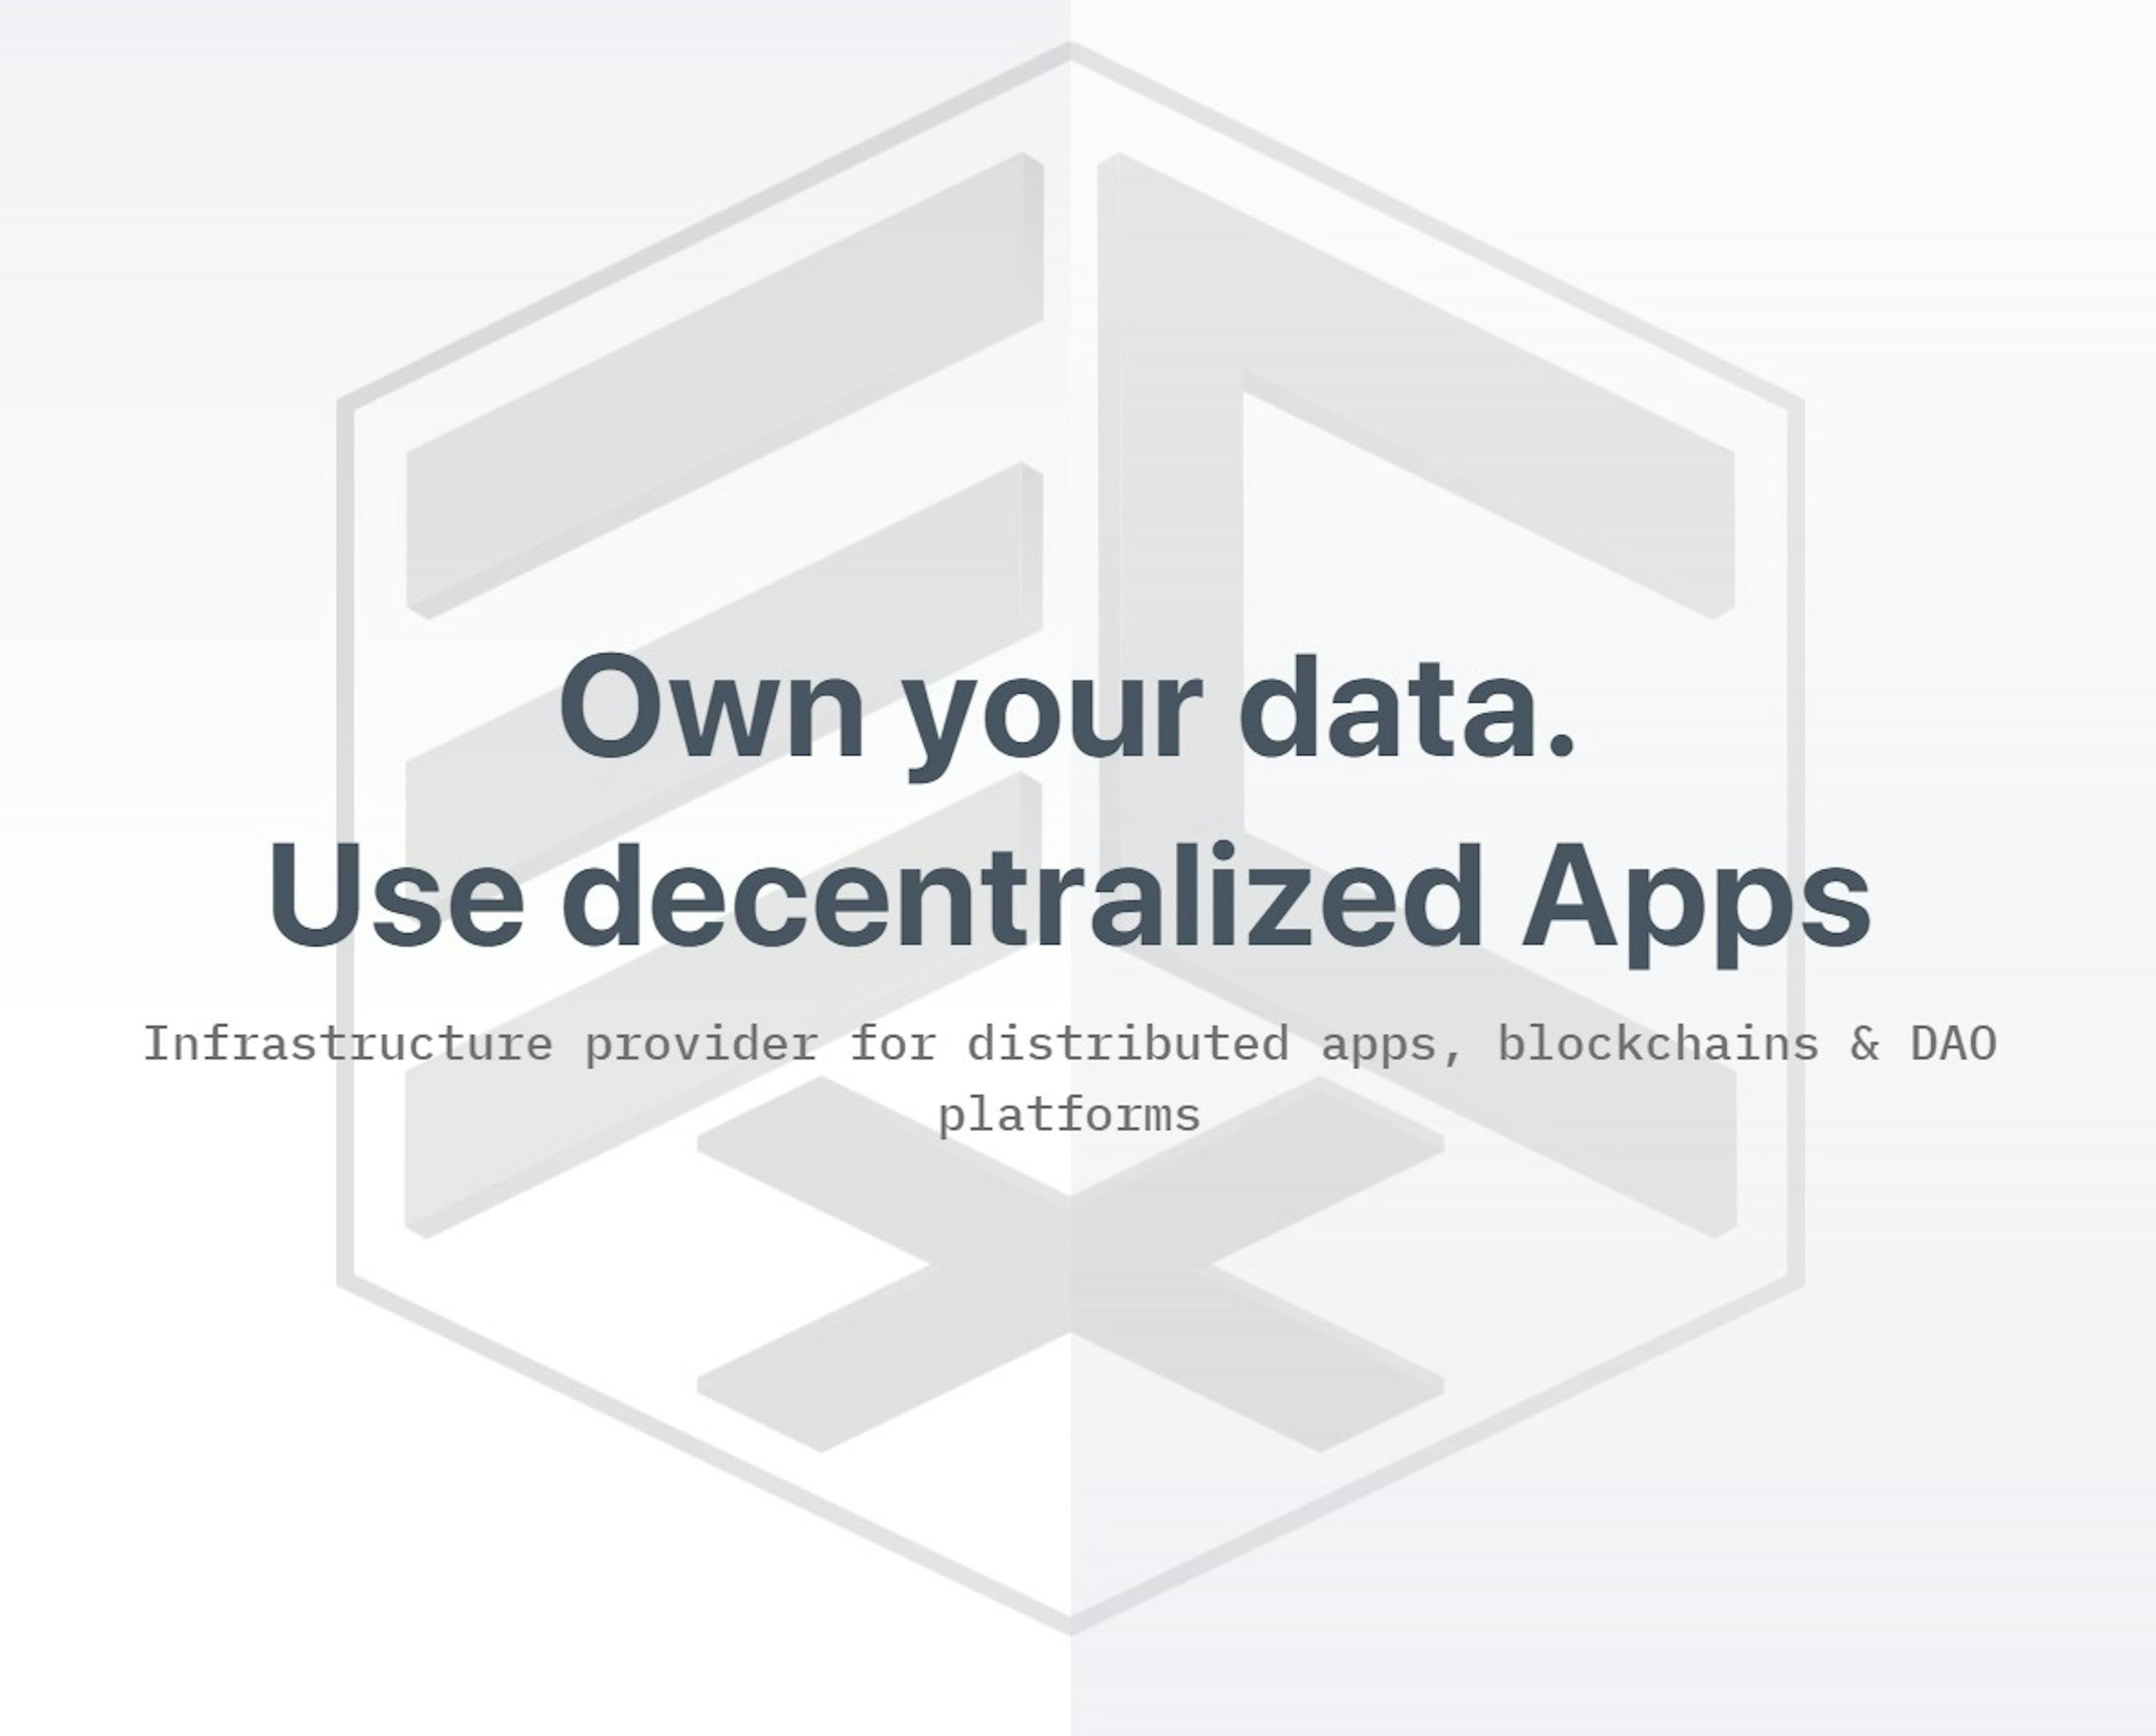 Own your data. Use decentralized Apps.